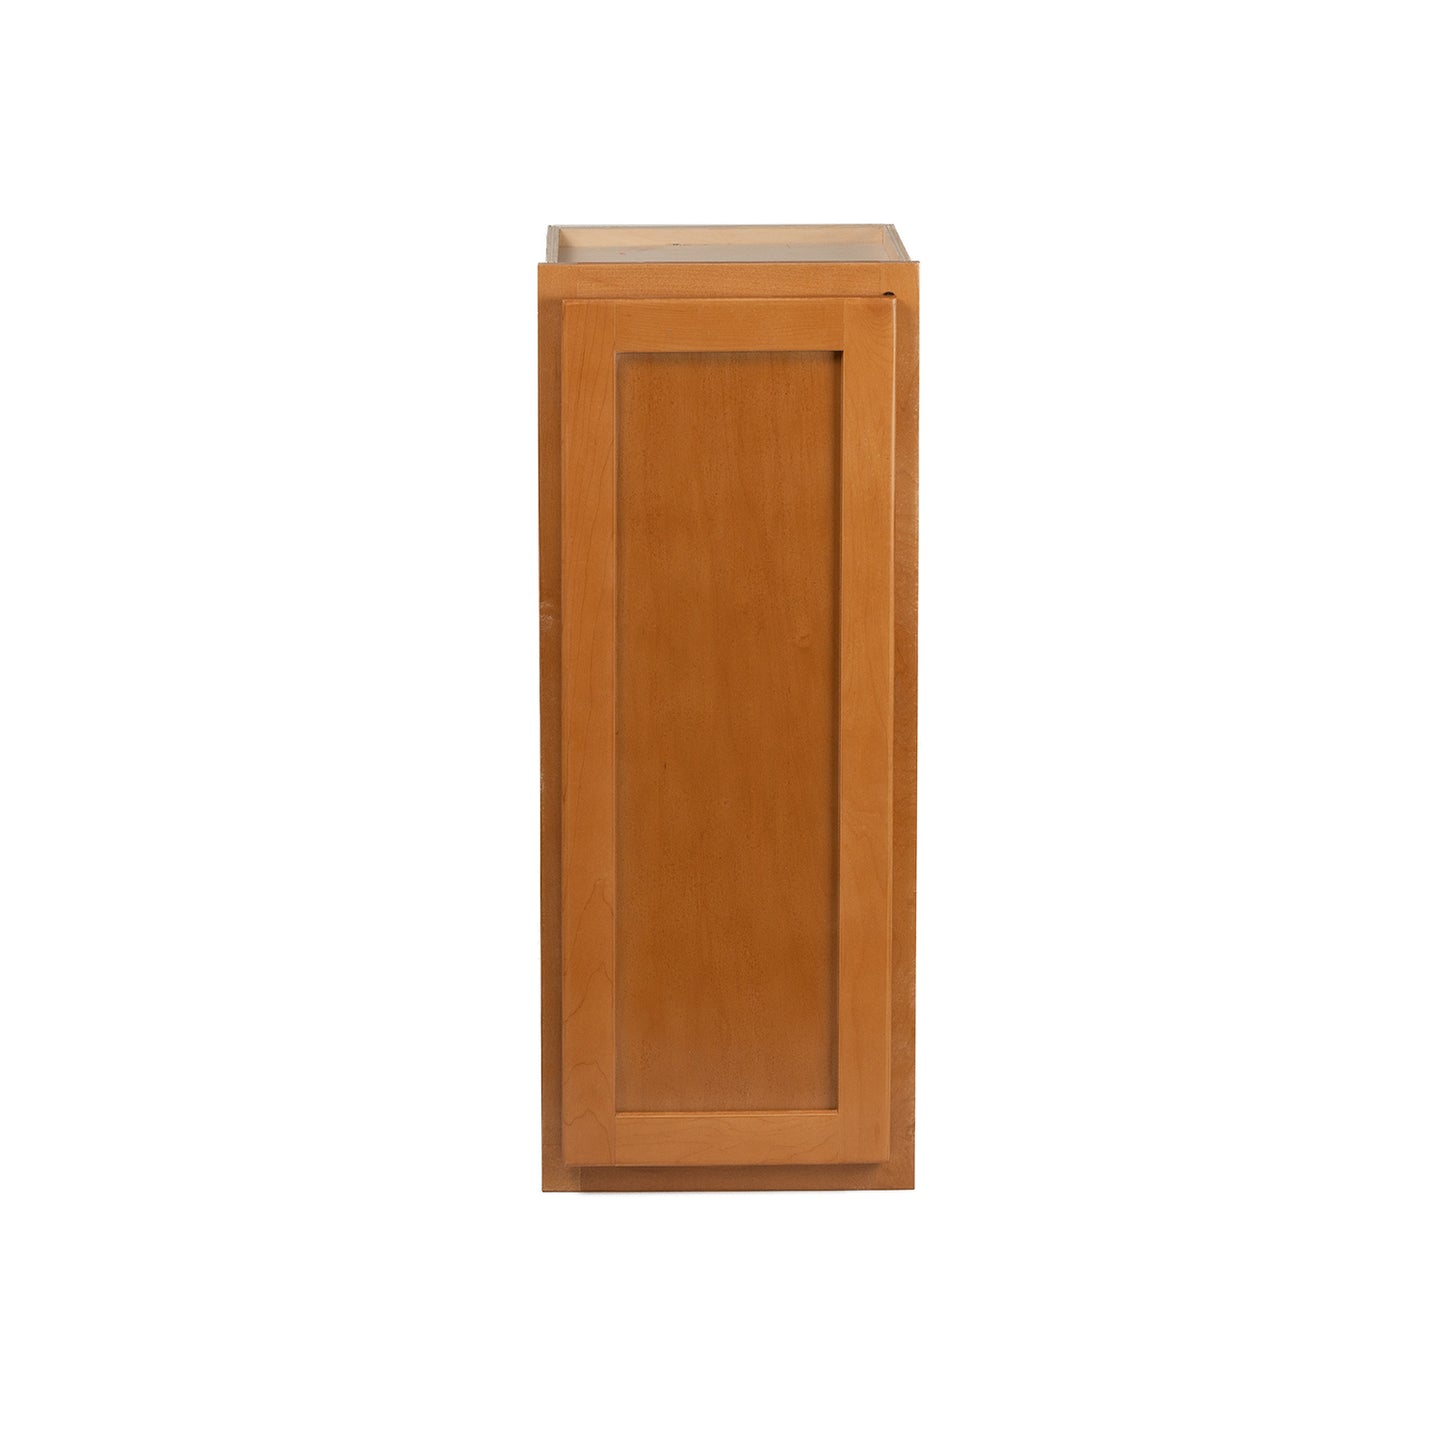 Quicklock RTA (Ready-to-Assemble) Provincial Stain 12"Wx36"Hx12"D Wall Cabinet